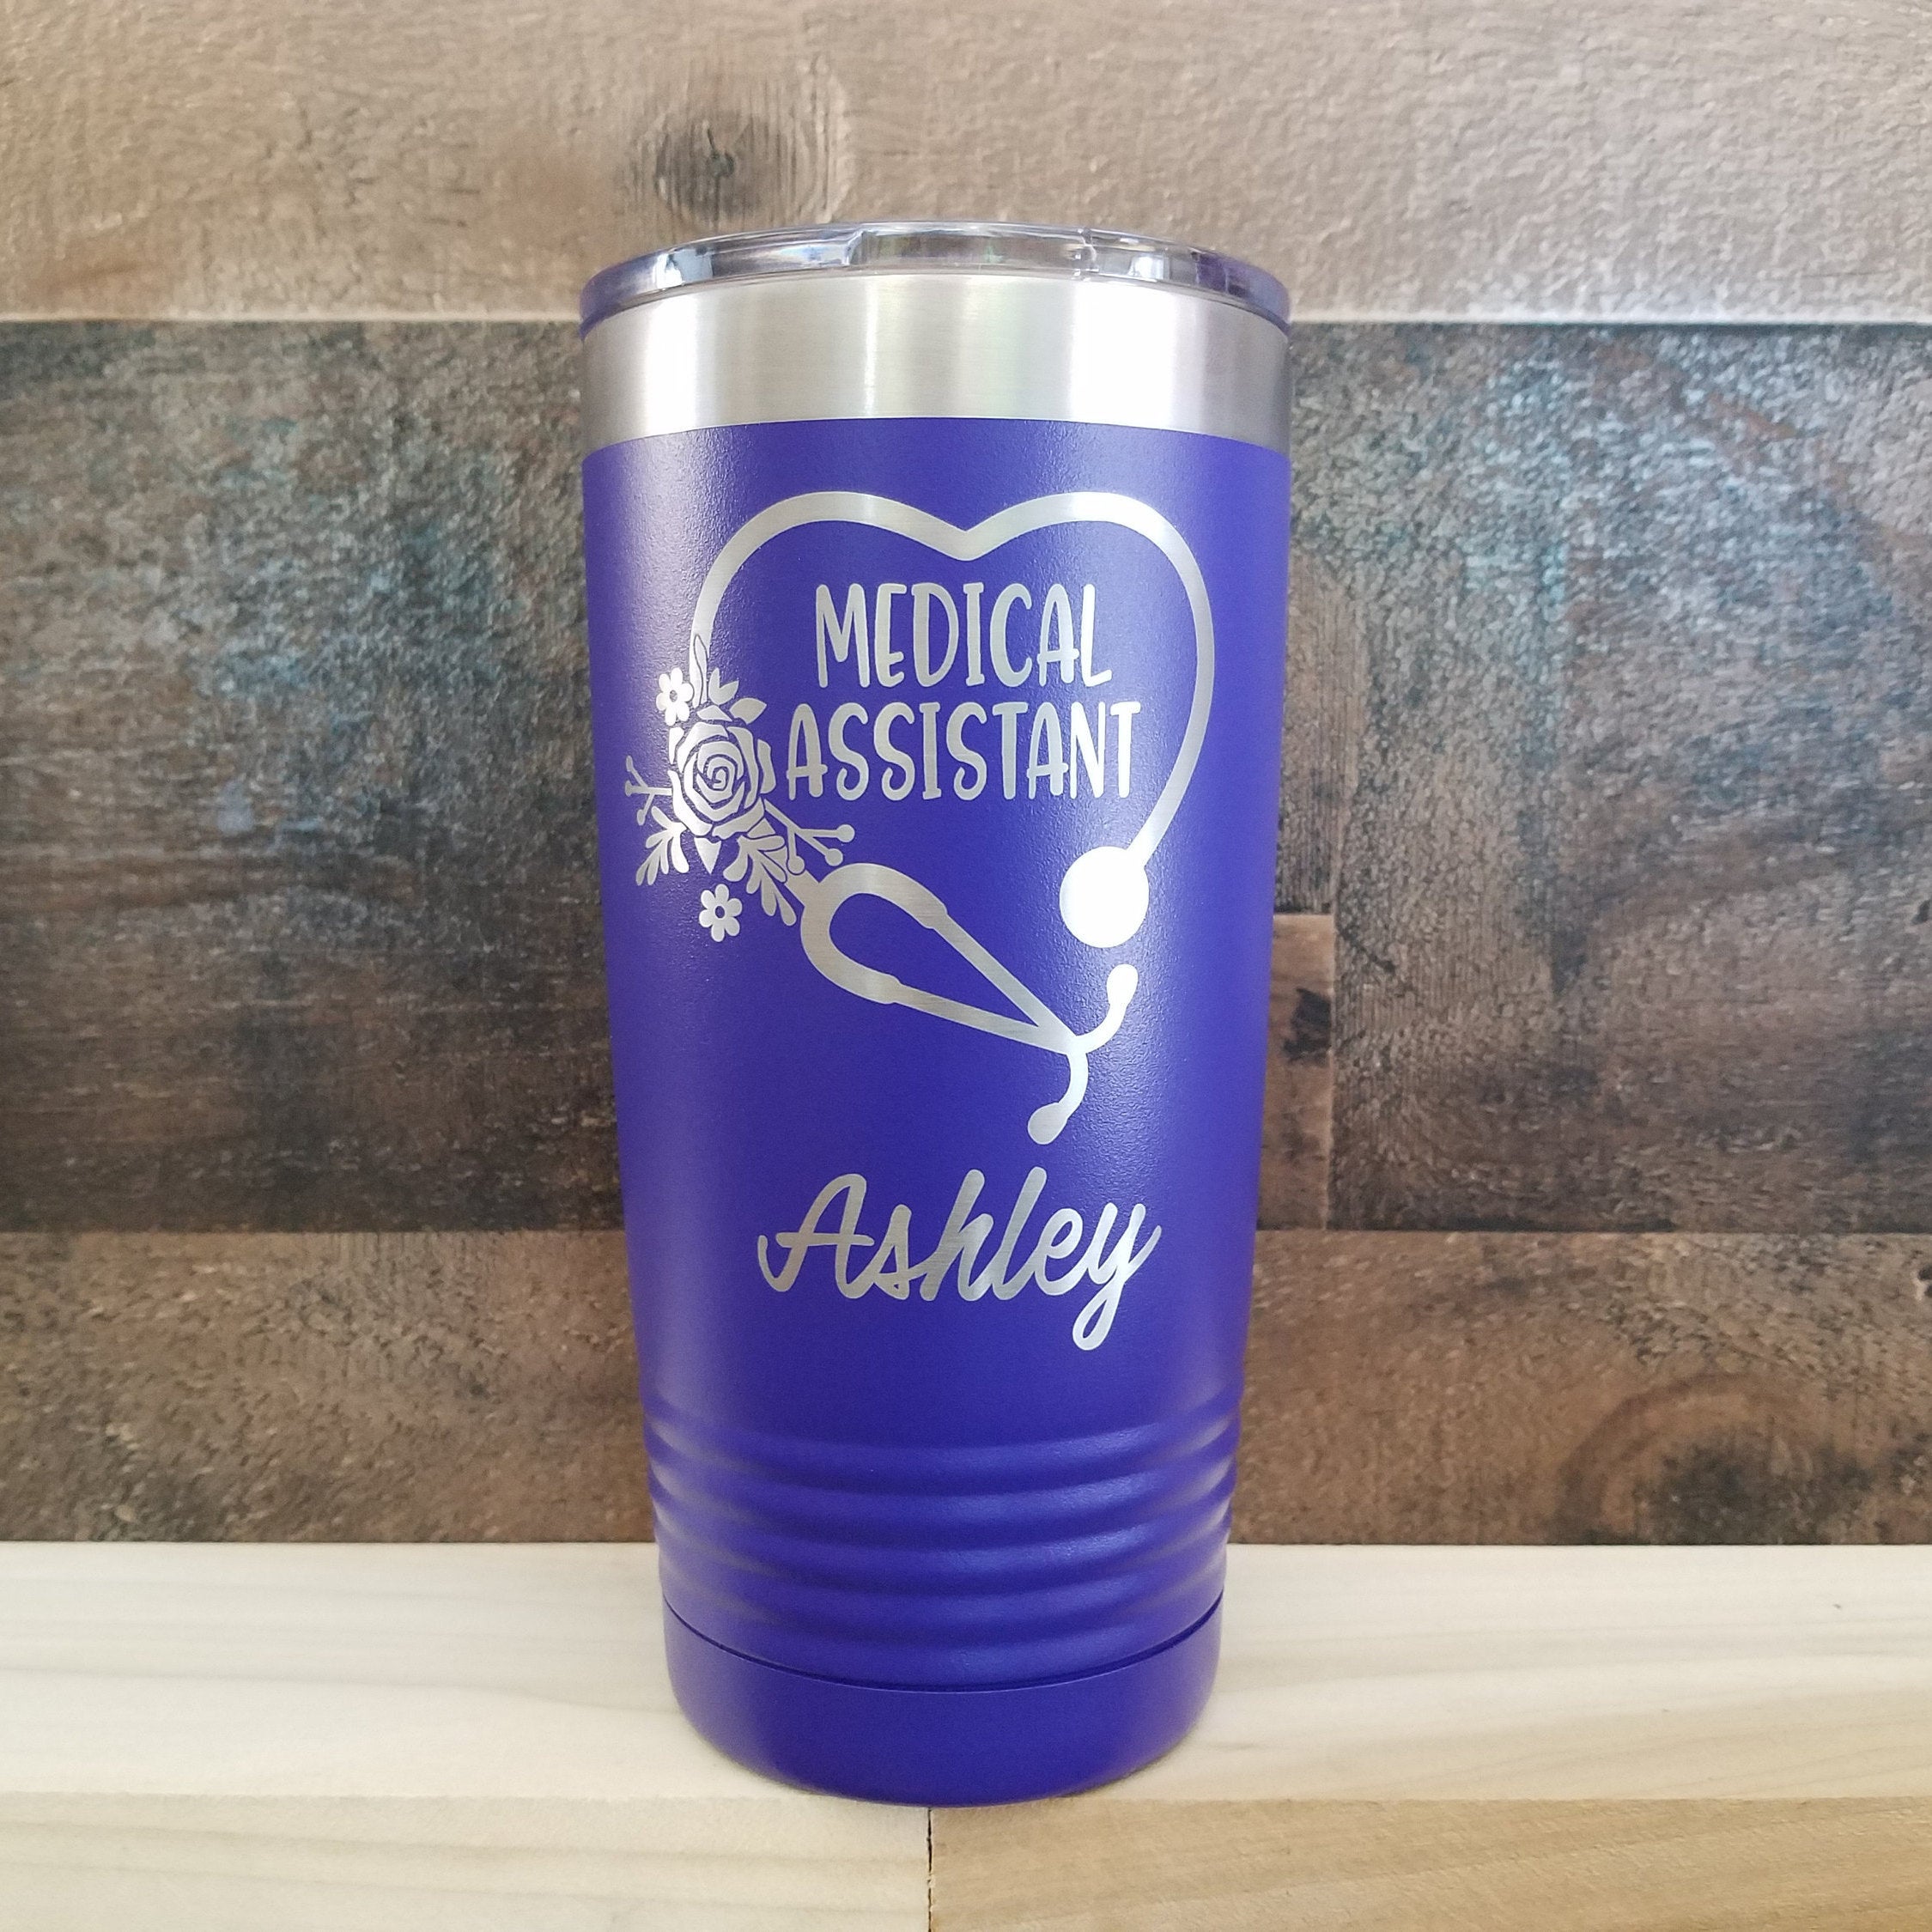 https://3cetching.com/wp-content/uploads/2020/09/medical-assistant-engraved-personalized-tumbler-with-name-yeti-style-cup-medical-student-gift-5f5fb5ac.jpg